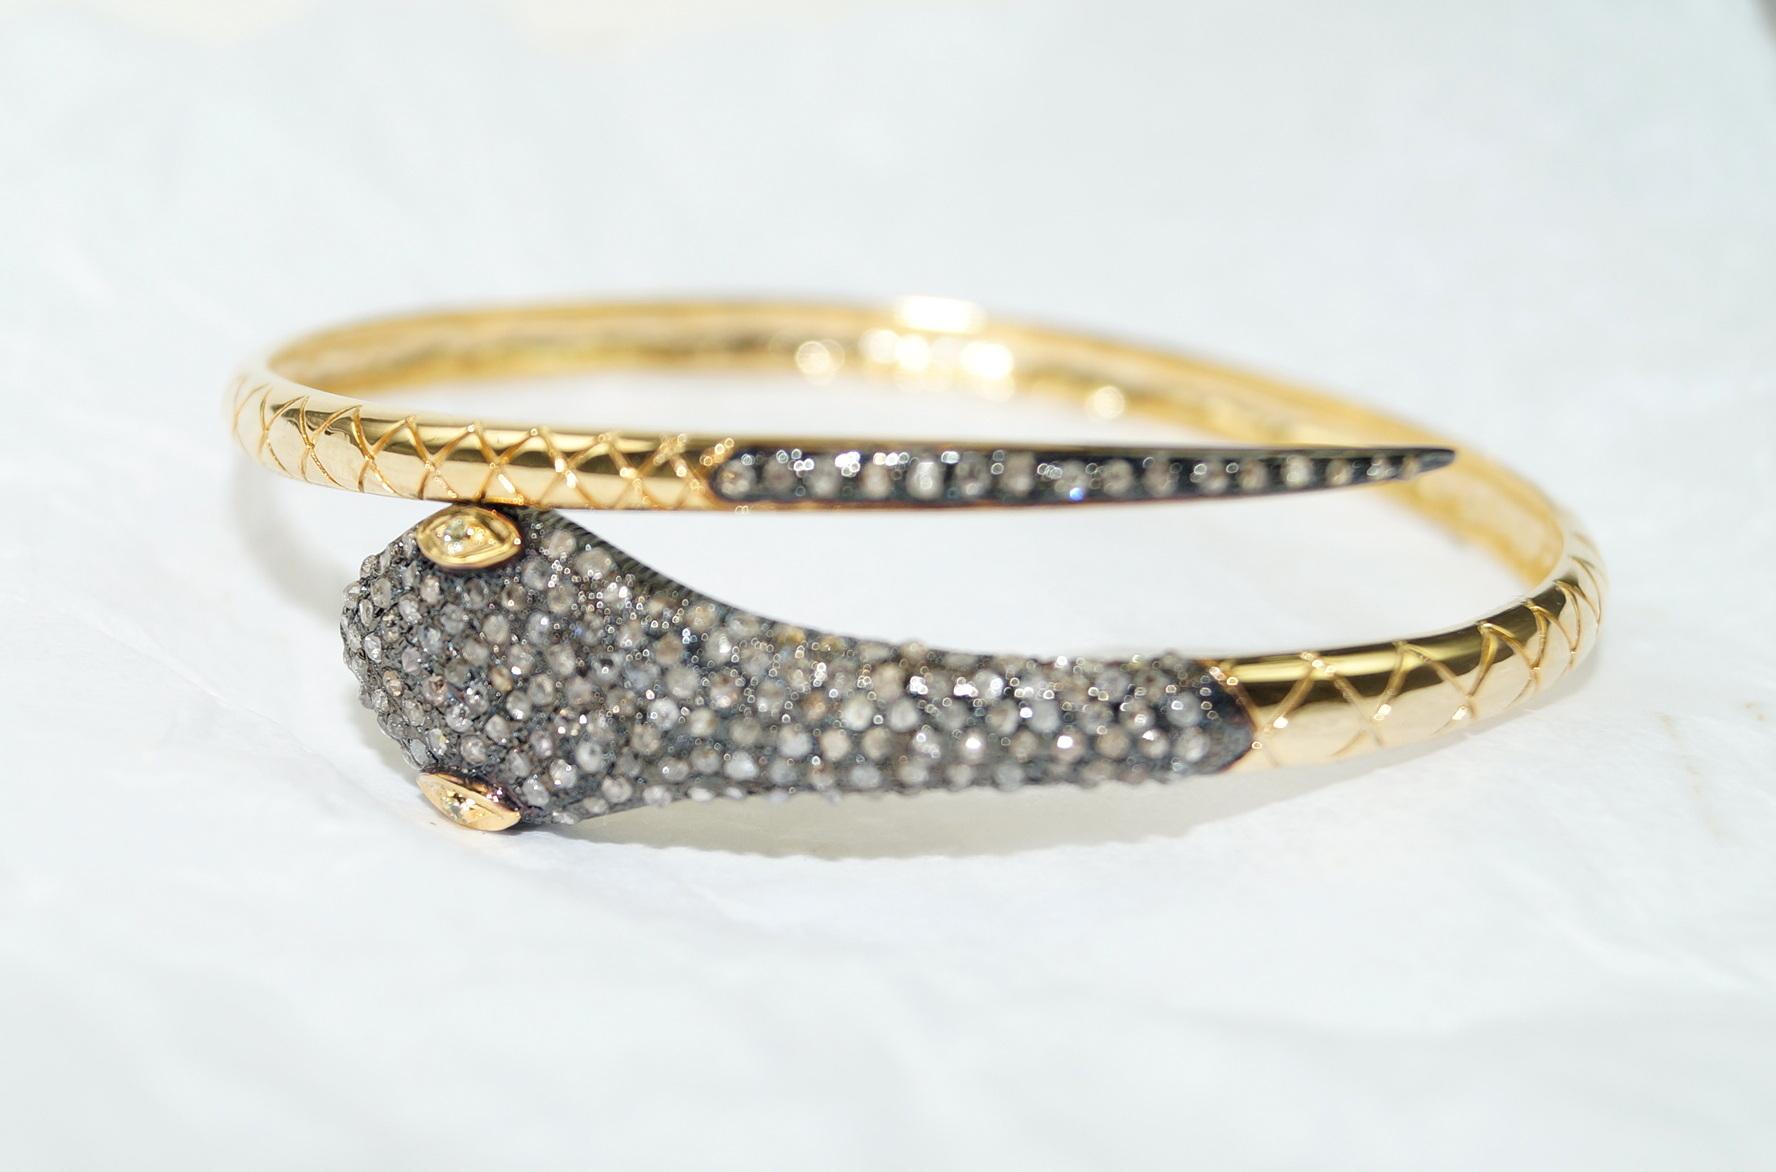 This snake gold bracelet is a versatile and captivating accessory that can add a touch of elegance, mystery, and individuality to your style. This diamond gold bracelet consists of:

Diamond- 2.88cts
Diamond type: Rose cut diamonds
Diamond color: 